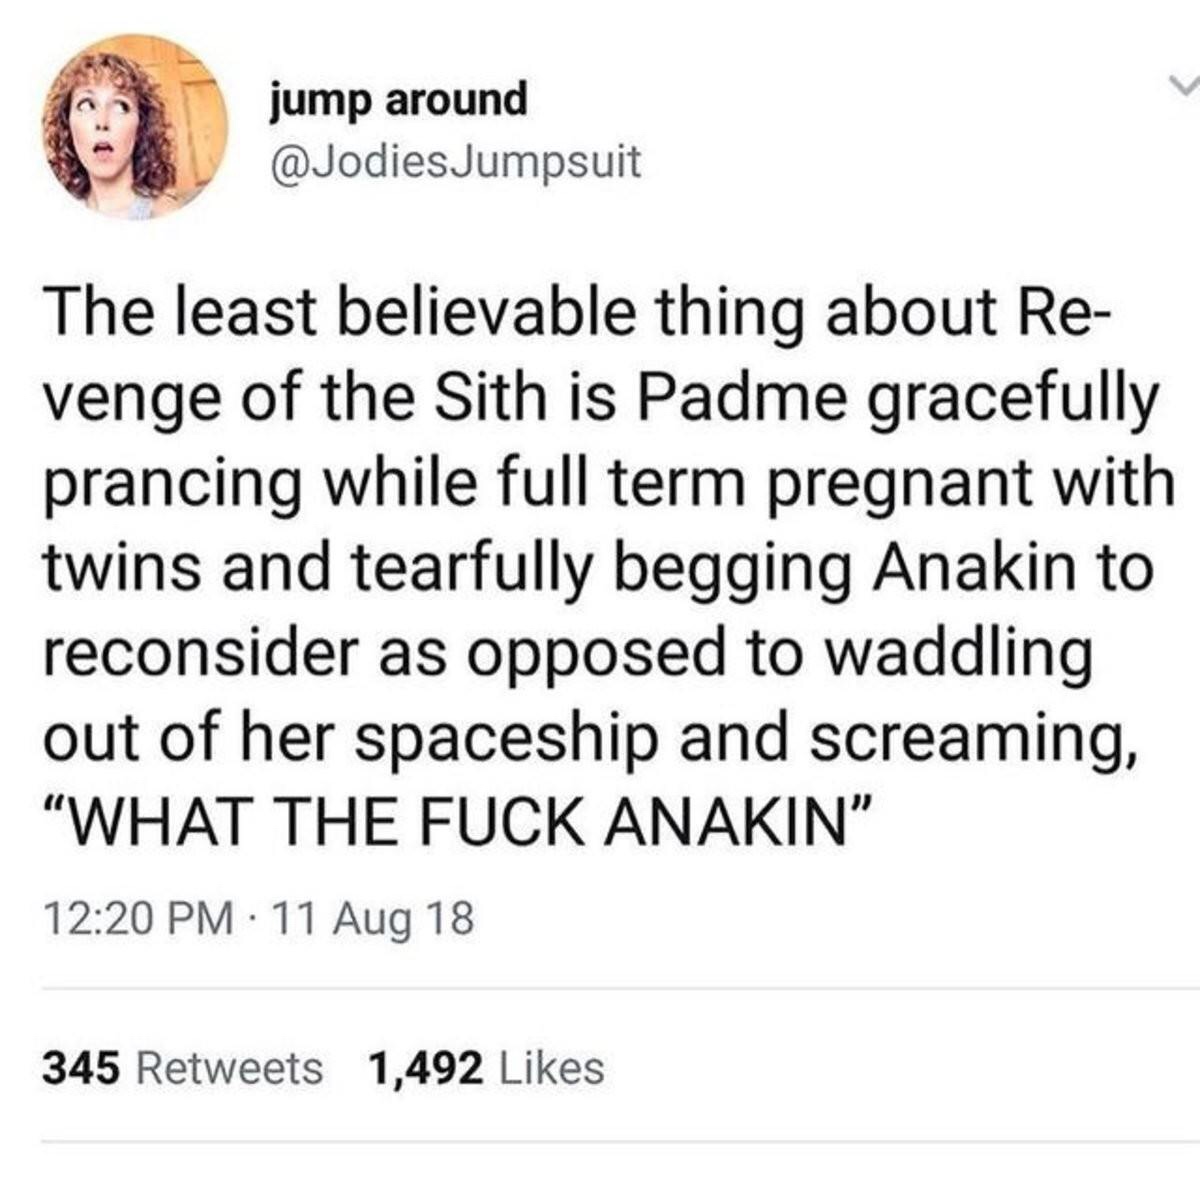 memes - nothing at all - jump around Jumpsuit The least believable thing about Re venge of the Sith is Padme gracefully prancing while full term pregnant with twins and tearfully begging Anakin to reconsider as opposed to waddling out of her spaceship and